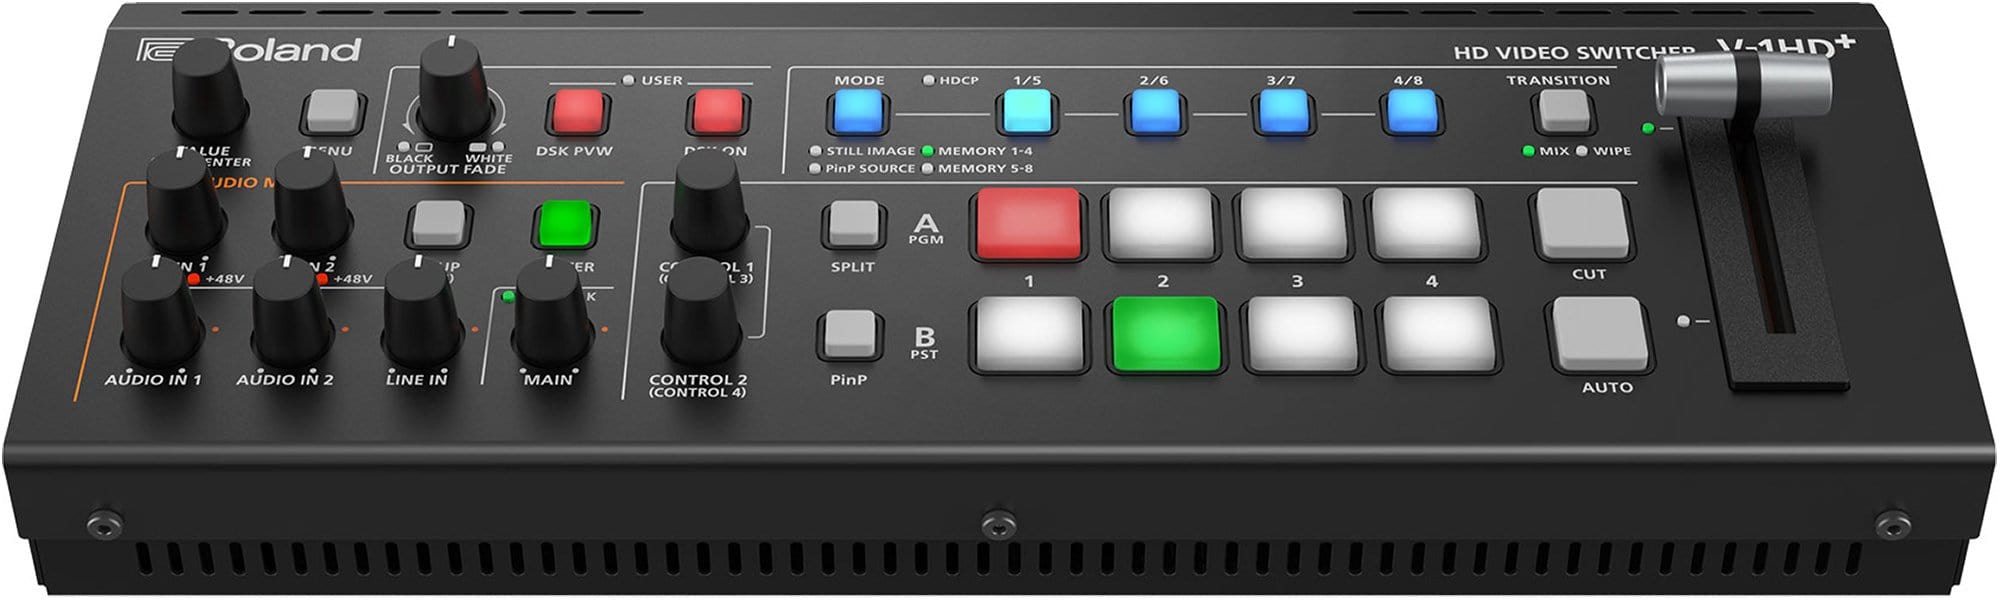 Roland V-1HD+ Video Switcher Streaming Bundle | Solotech